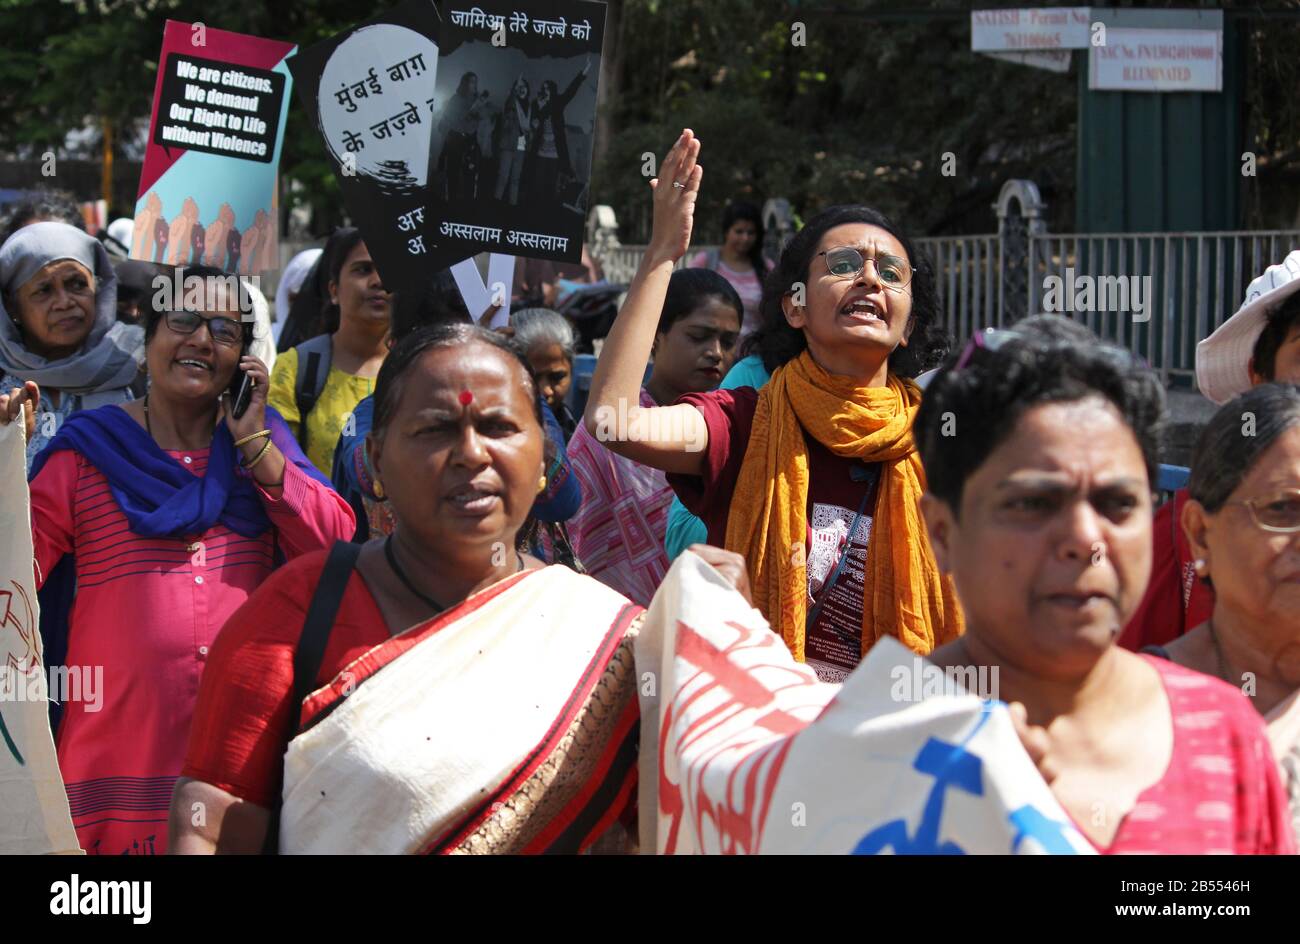 A woman shouts slogans during the demonstration.Women from various organizations, including tribal and dalit communities, gather in large numbers to take part in a march against Citizenship Amendment Act (CAA), National Register of Citizens (NRC) and National Population Register (NPR), as they mark the International Women’s Day on March 8, 2020. Stock Photo